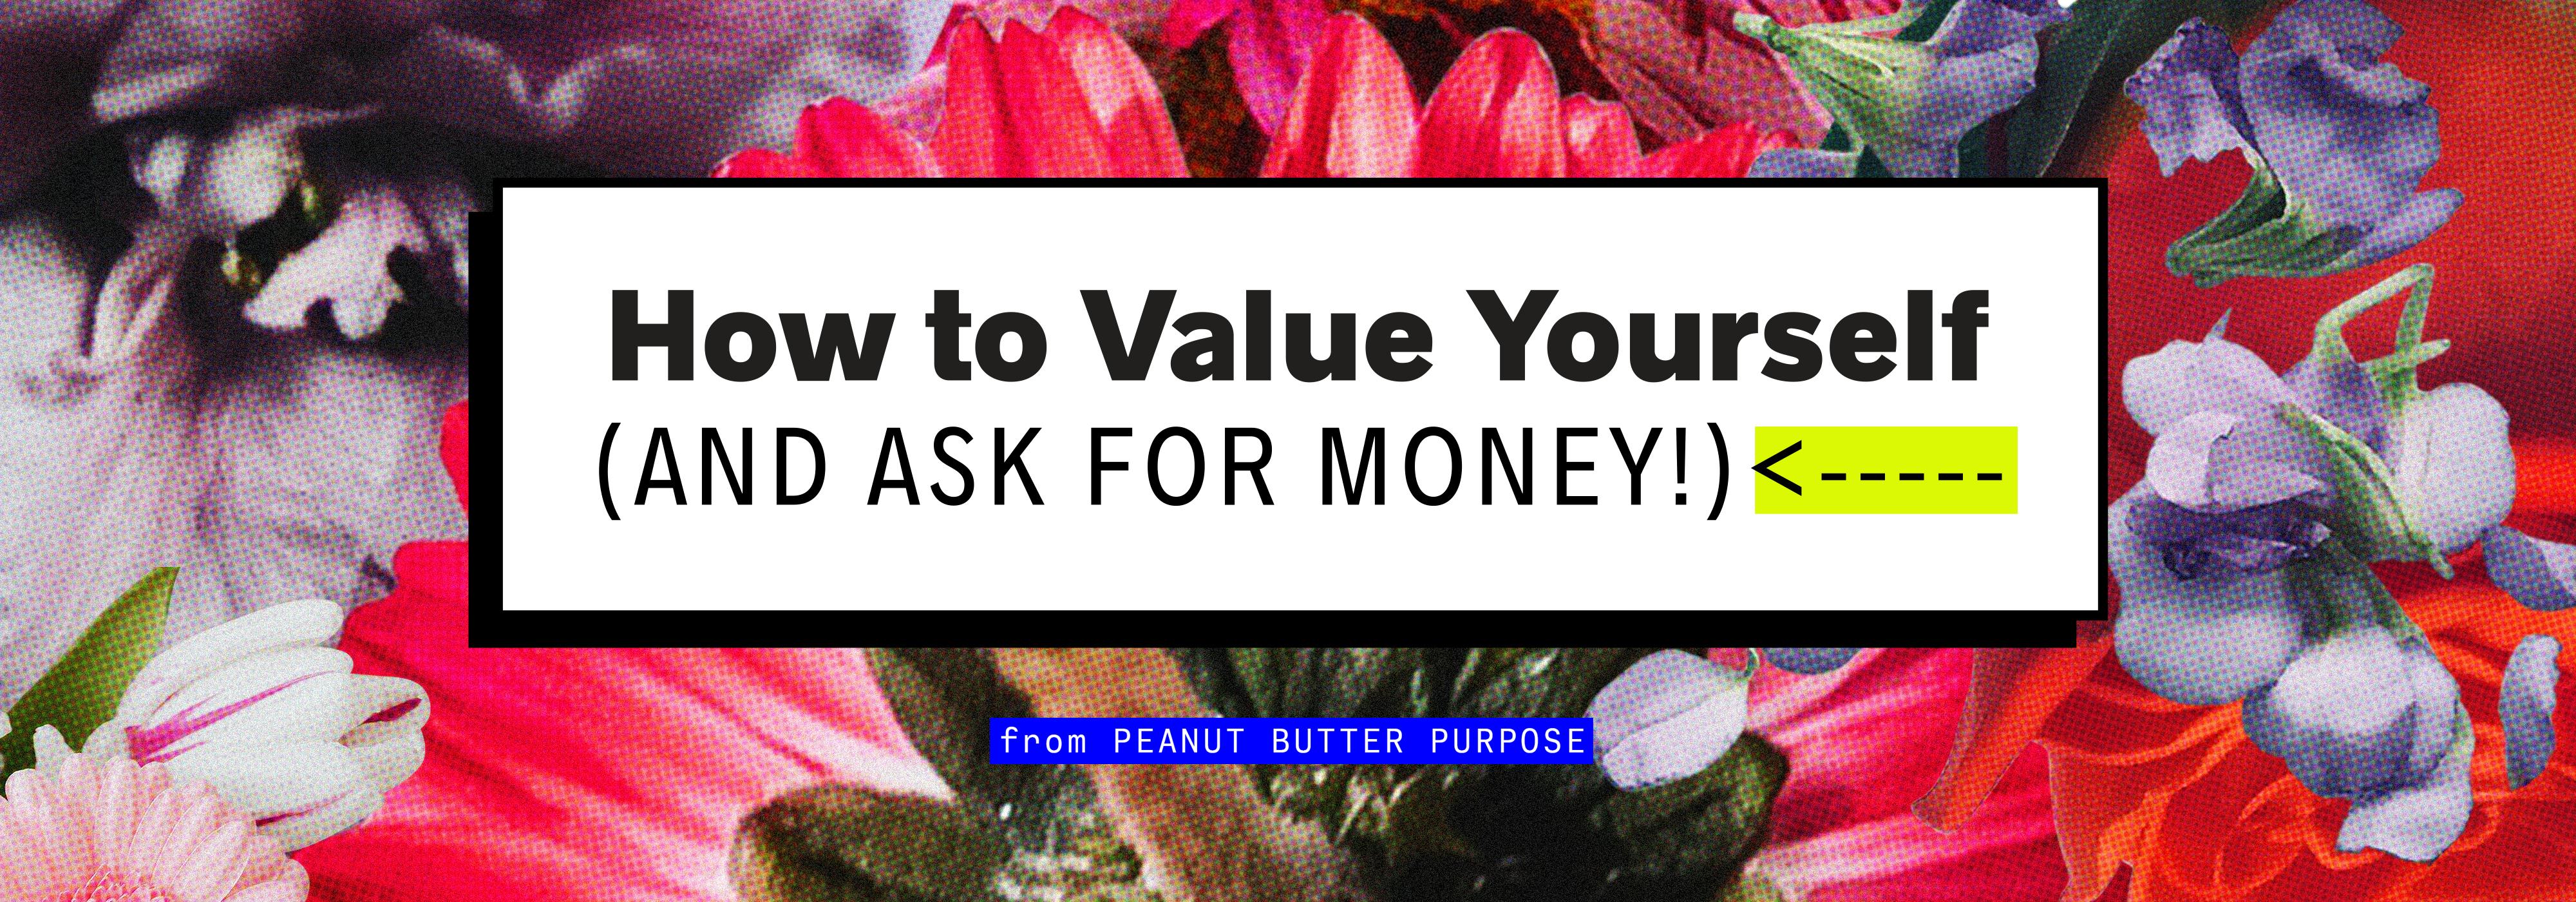 How to Value Yourself